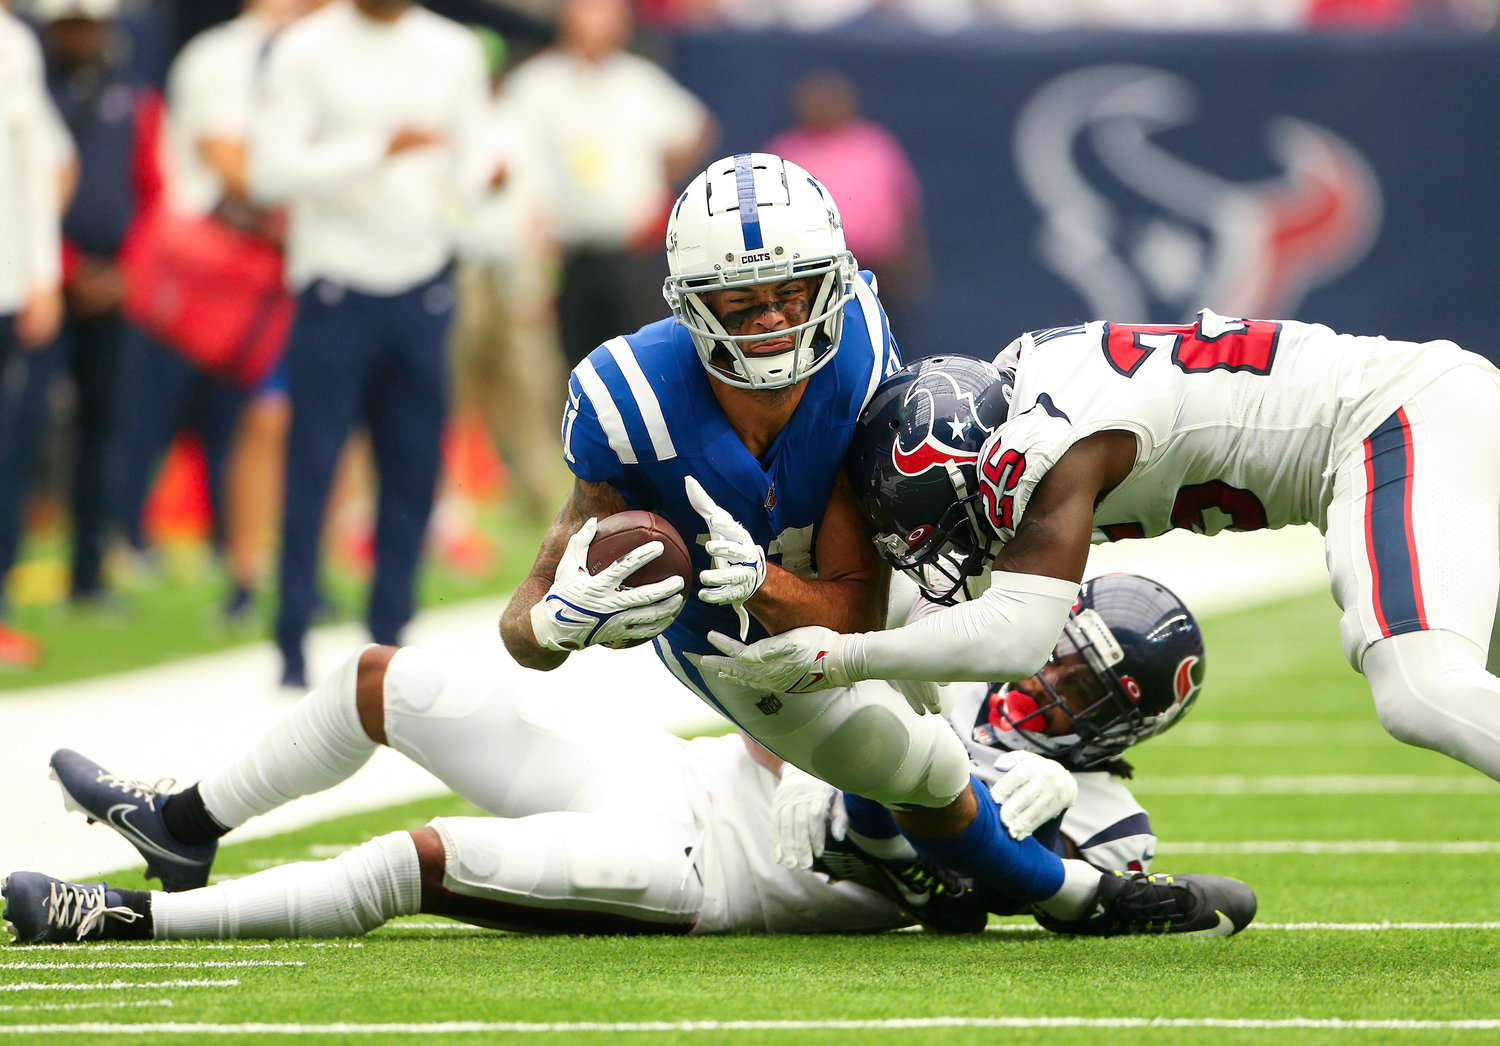 Houston Texans cornerbacks Steven Nelson (21) and  Desmond King II (25) tackle Indianapolis Colts wide receiver Michael Pittman Jr. (11) after a catch in an NFL game between the Texans and the Colts on September 11, 2022 in Houston. The game ended in a 20-20 tie after a scoreless overtime period.